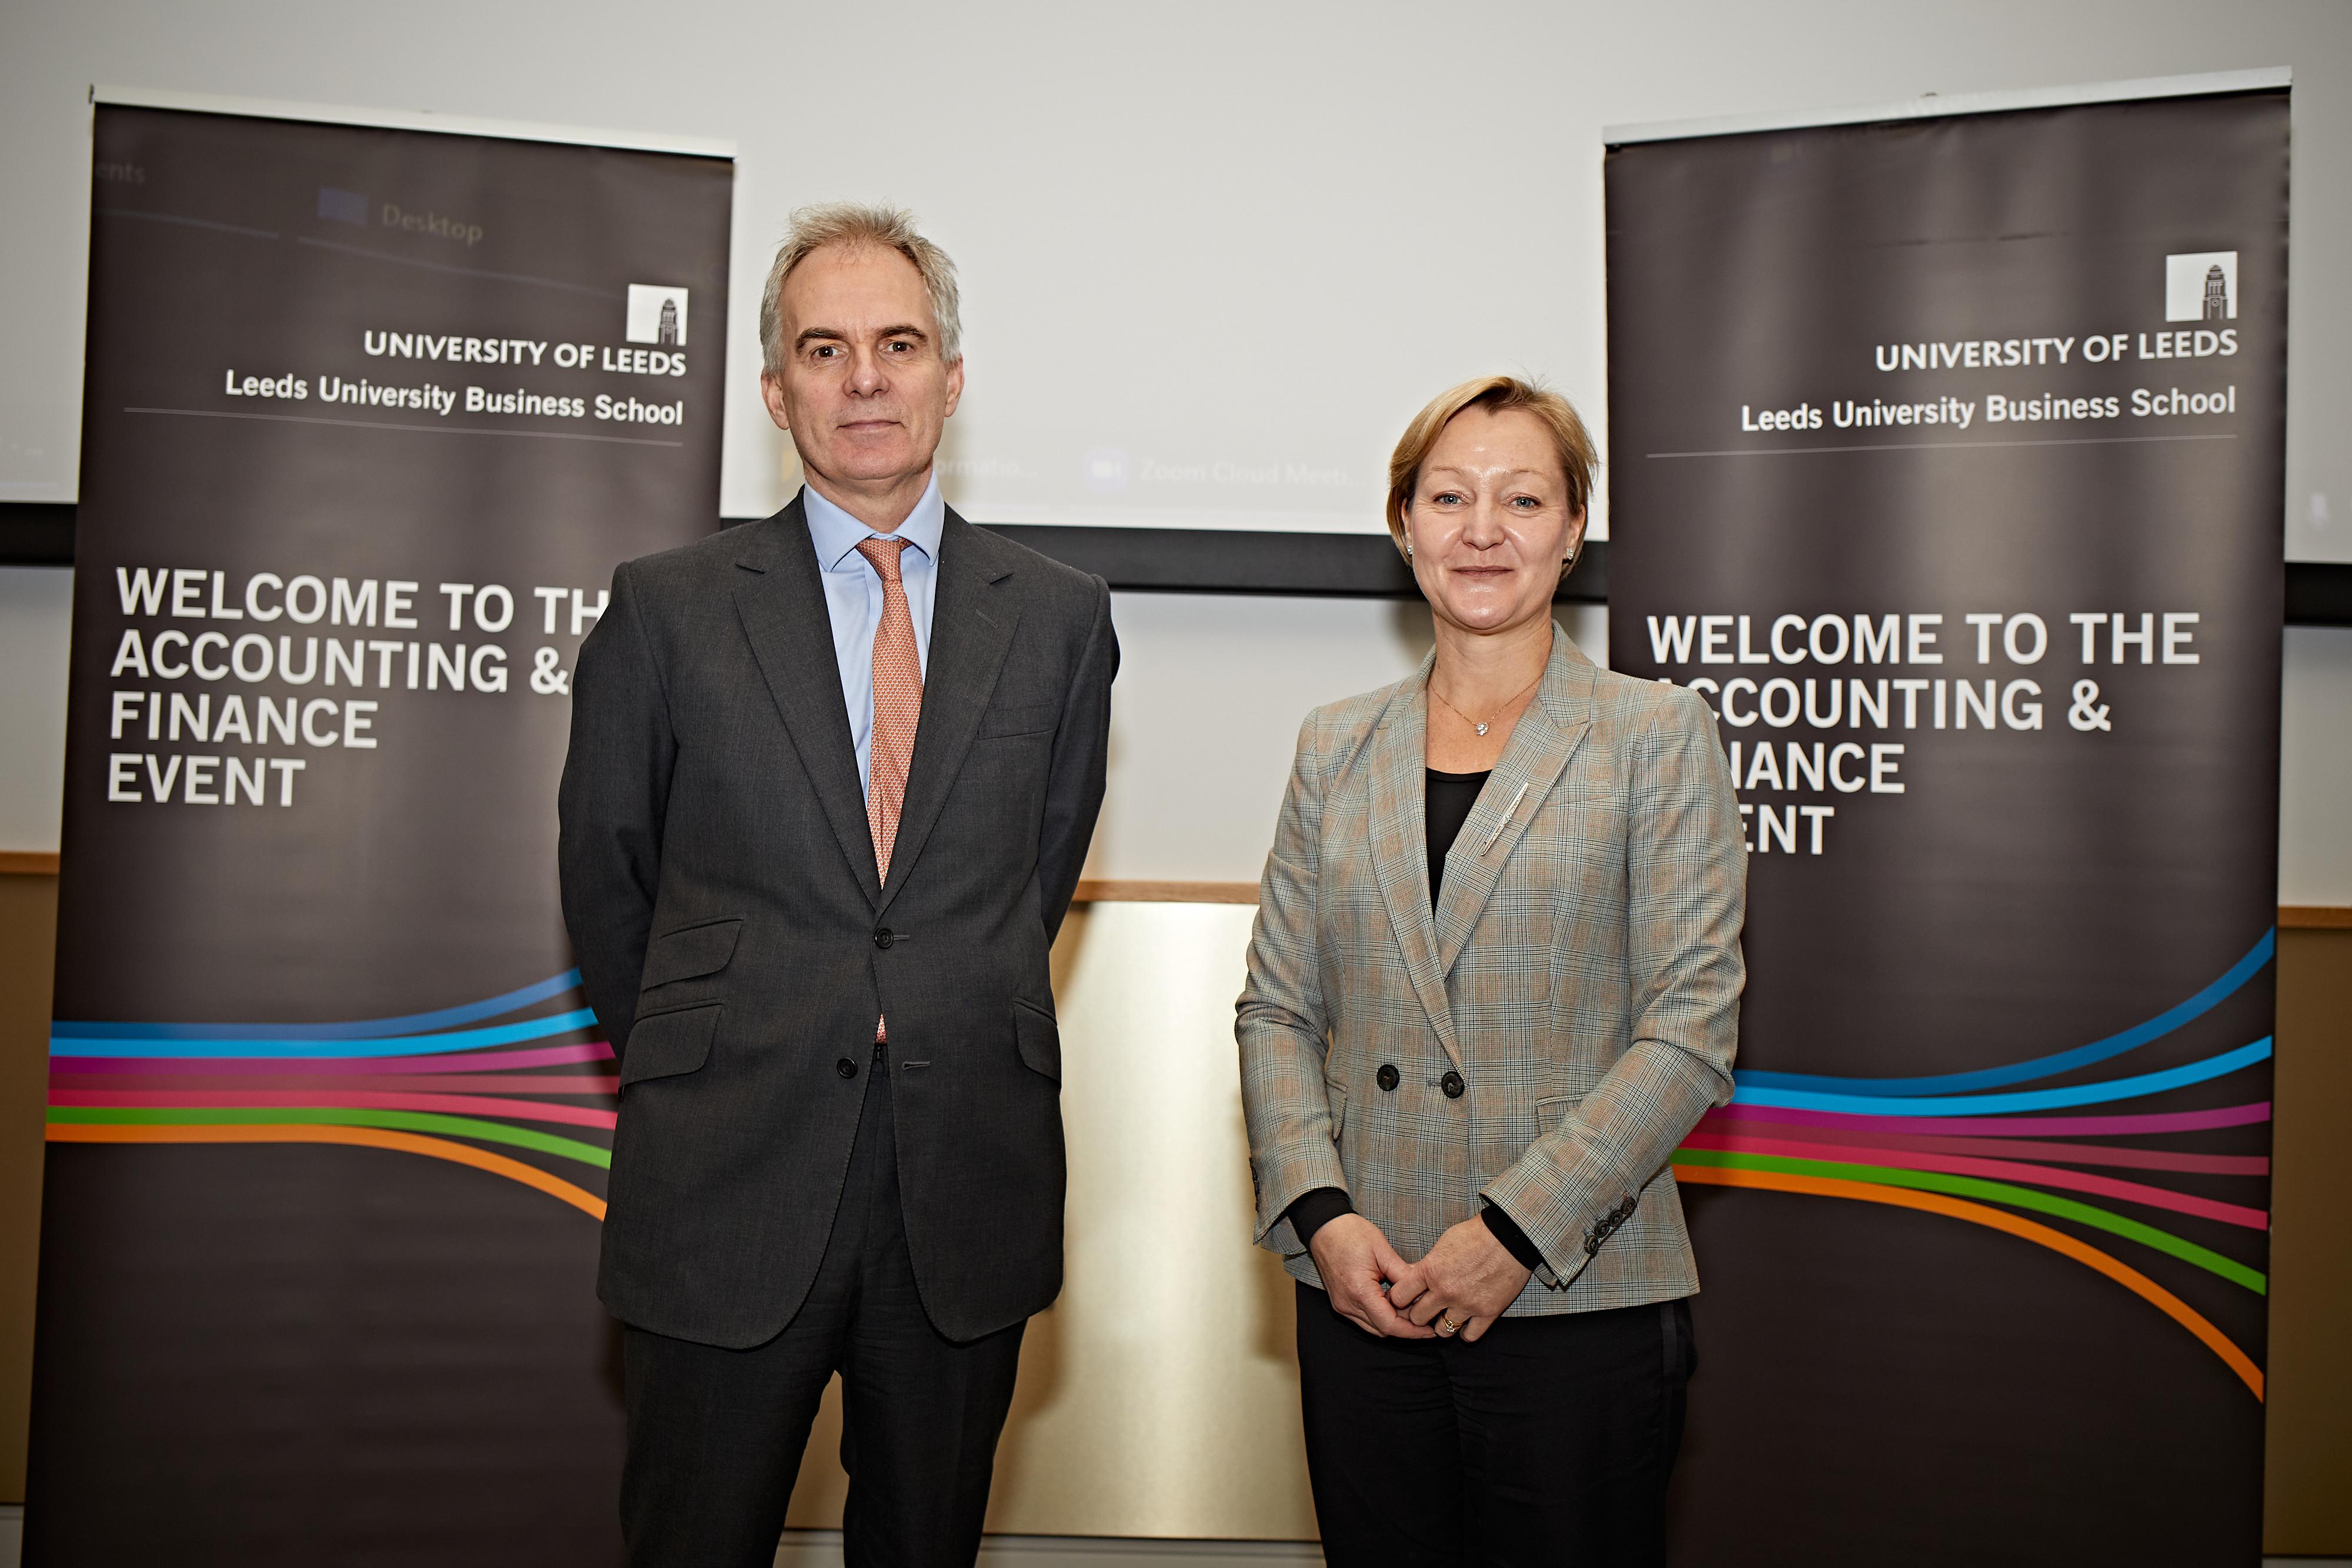 Dr Ben Broadbent of the Bank of England and Professor Julia Bennell from Leeds University Business School